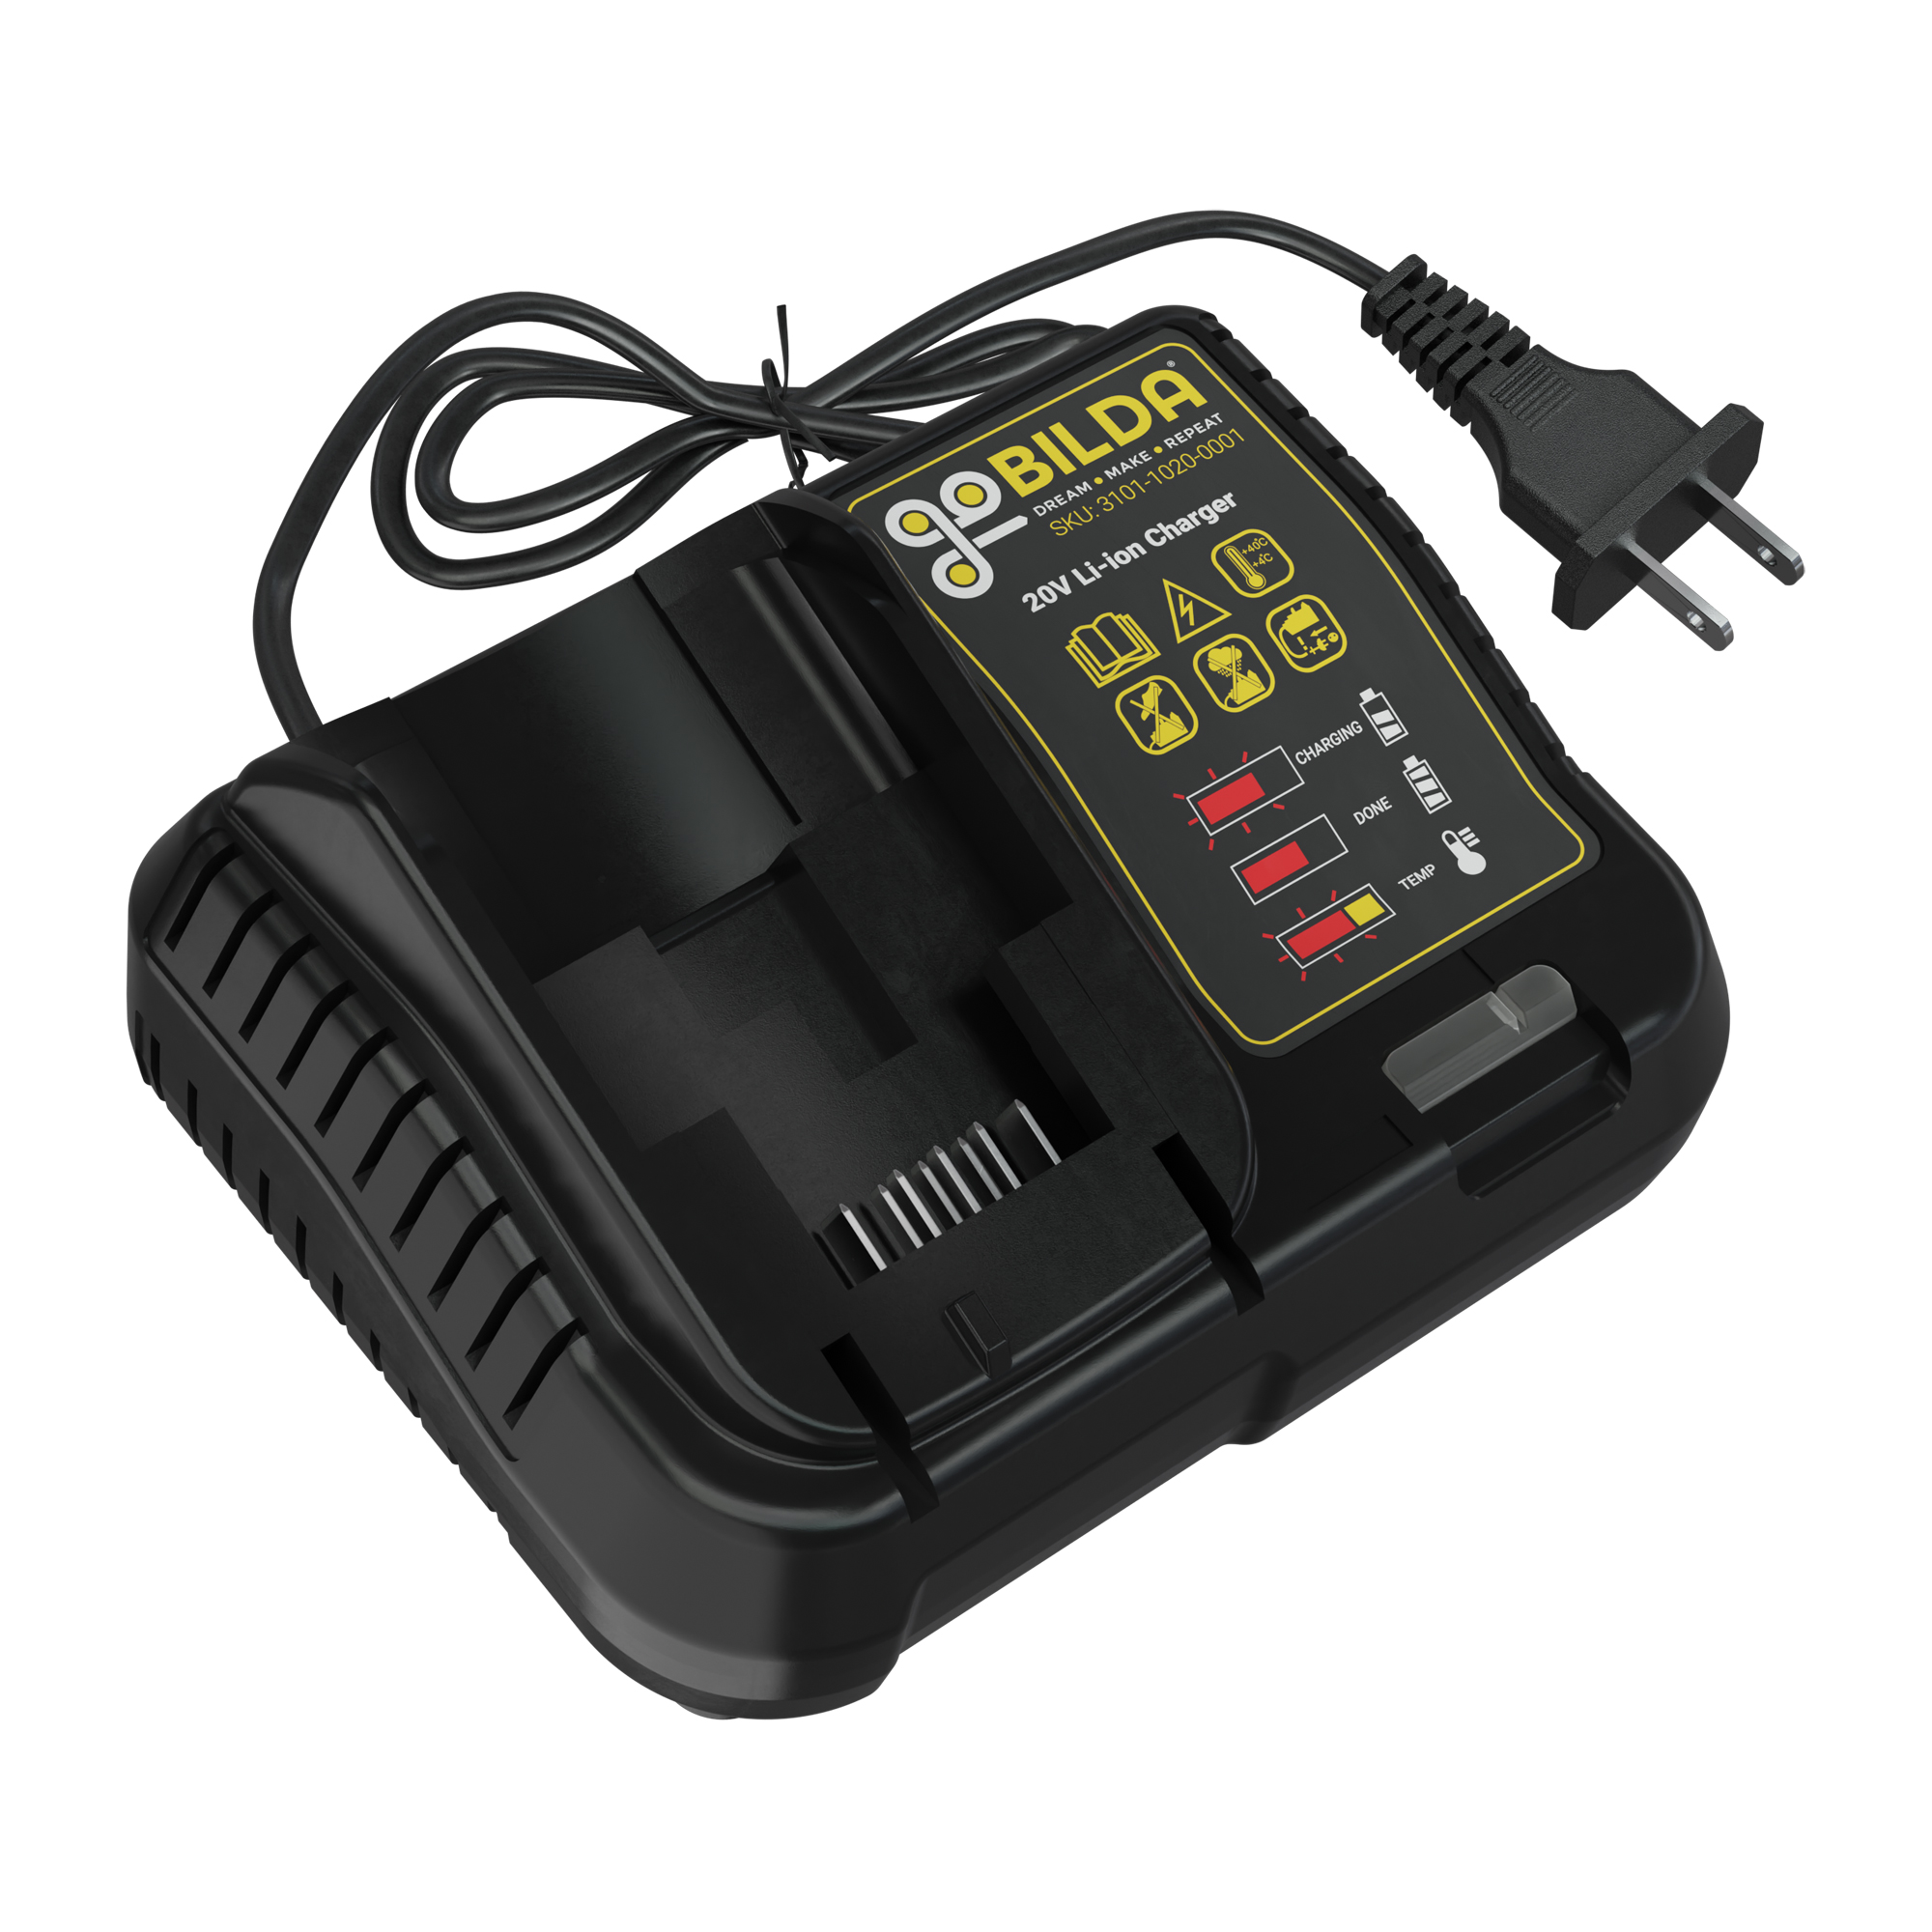 Quality 20v battery charger At Great Prices 